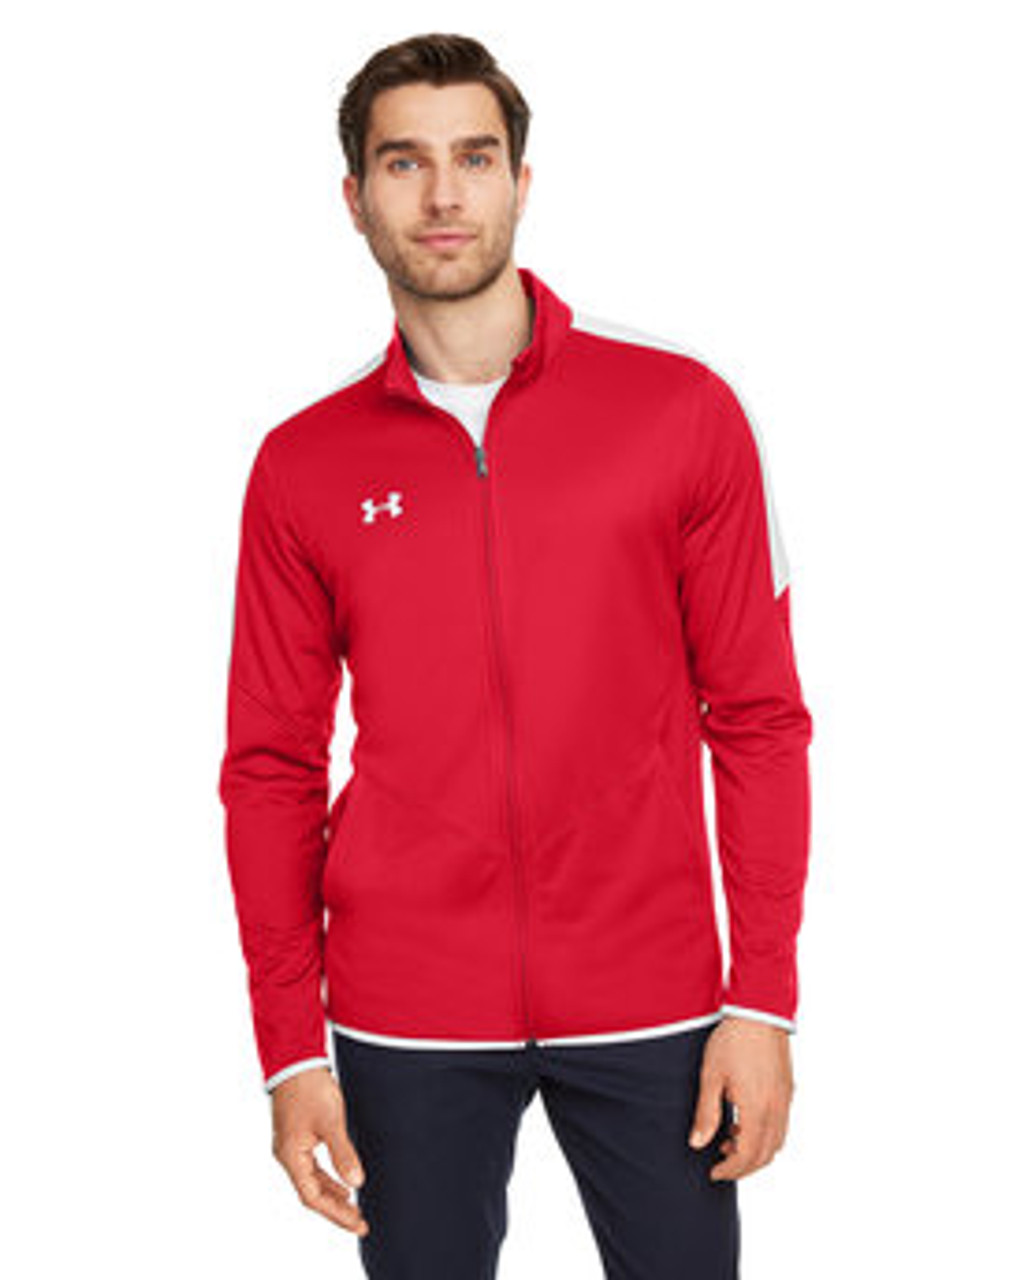 Under Armour Men's Rival Knit Jacket 1326761 RED _600